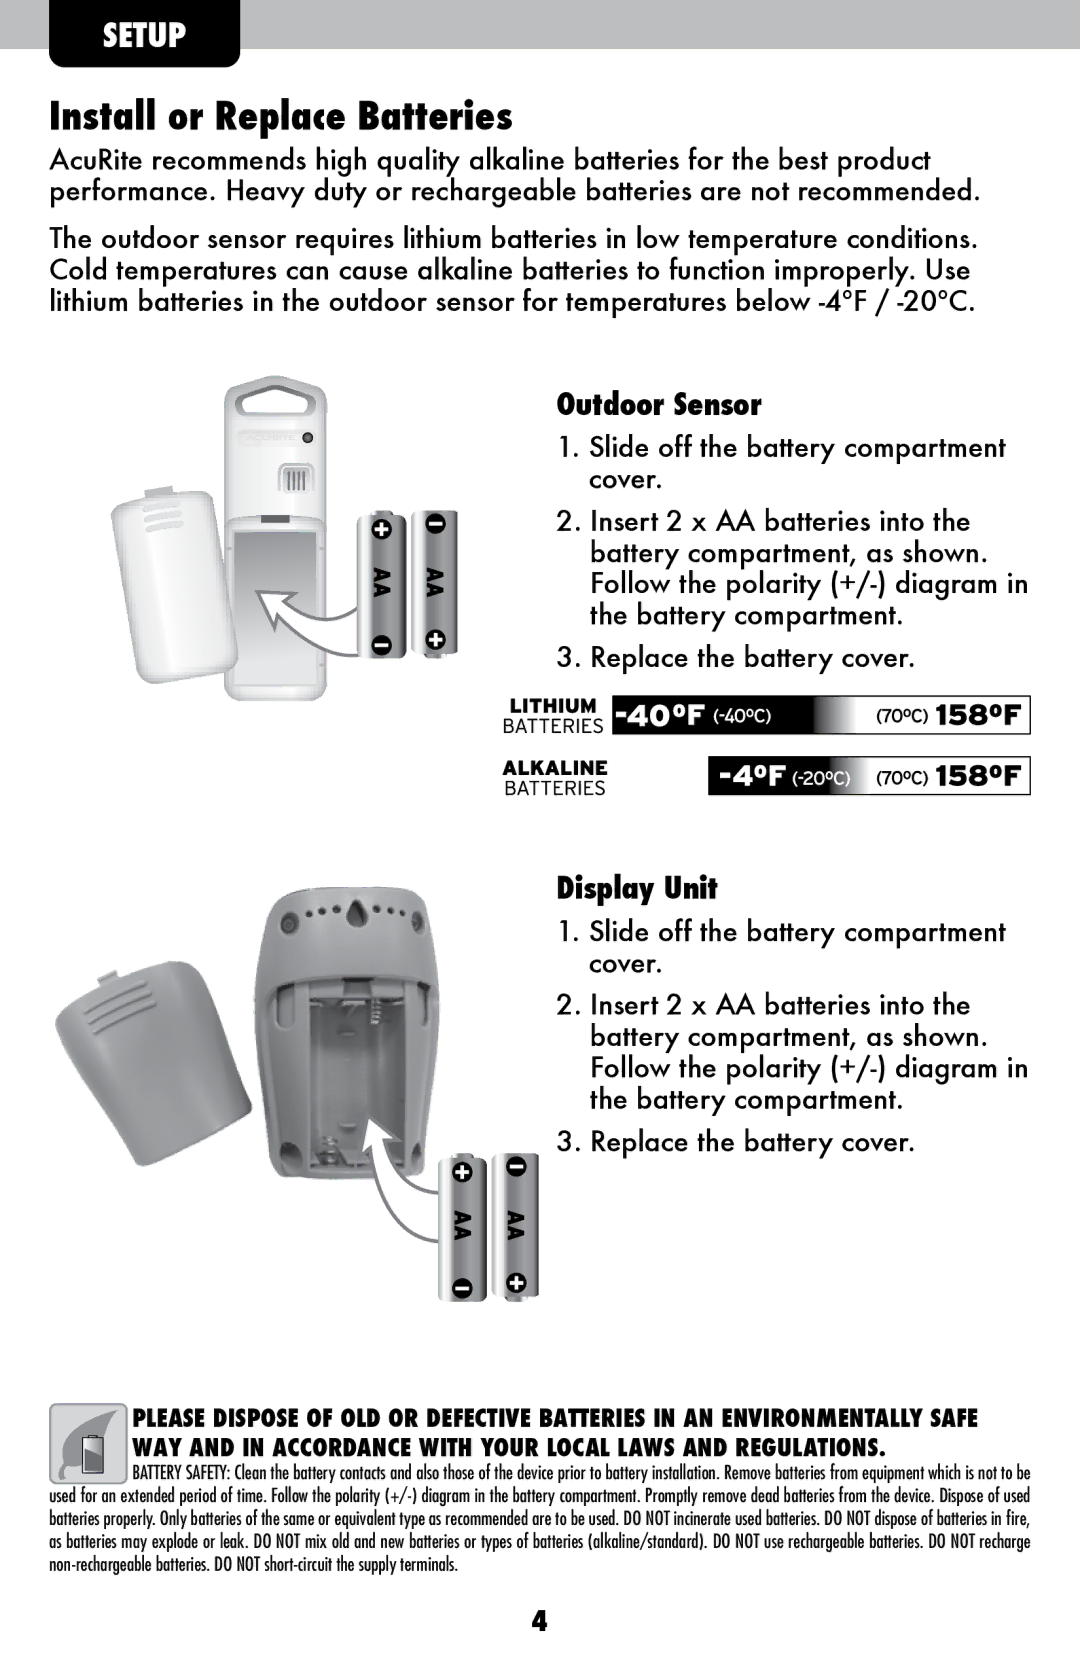 Chaney Instrument 415, 417, 420, 416, 418 instruction manual Install or Replace Batteries, Outdoor Sensor 